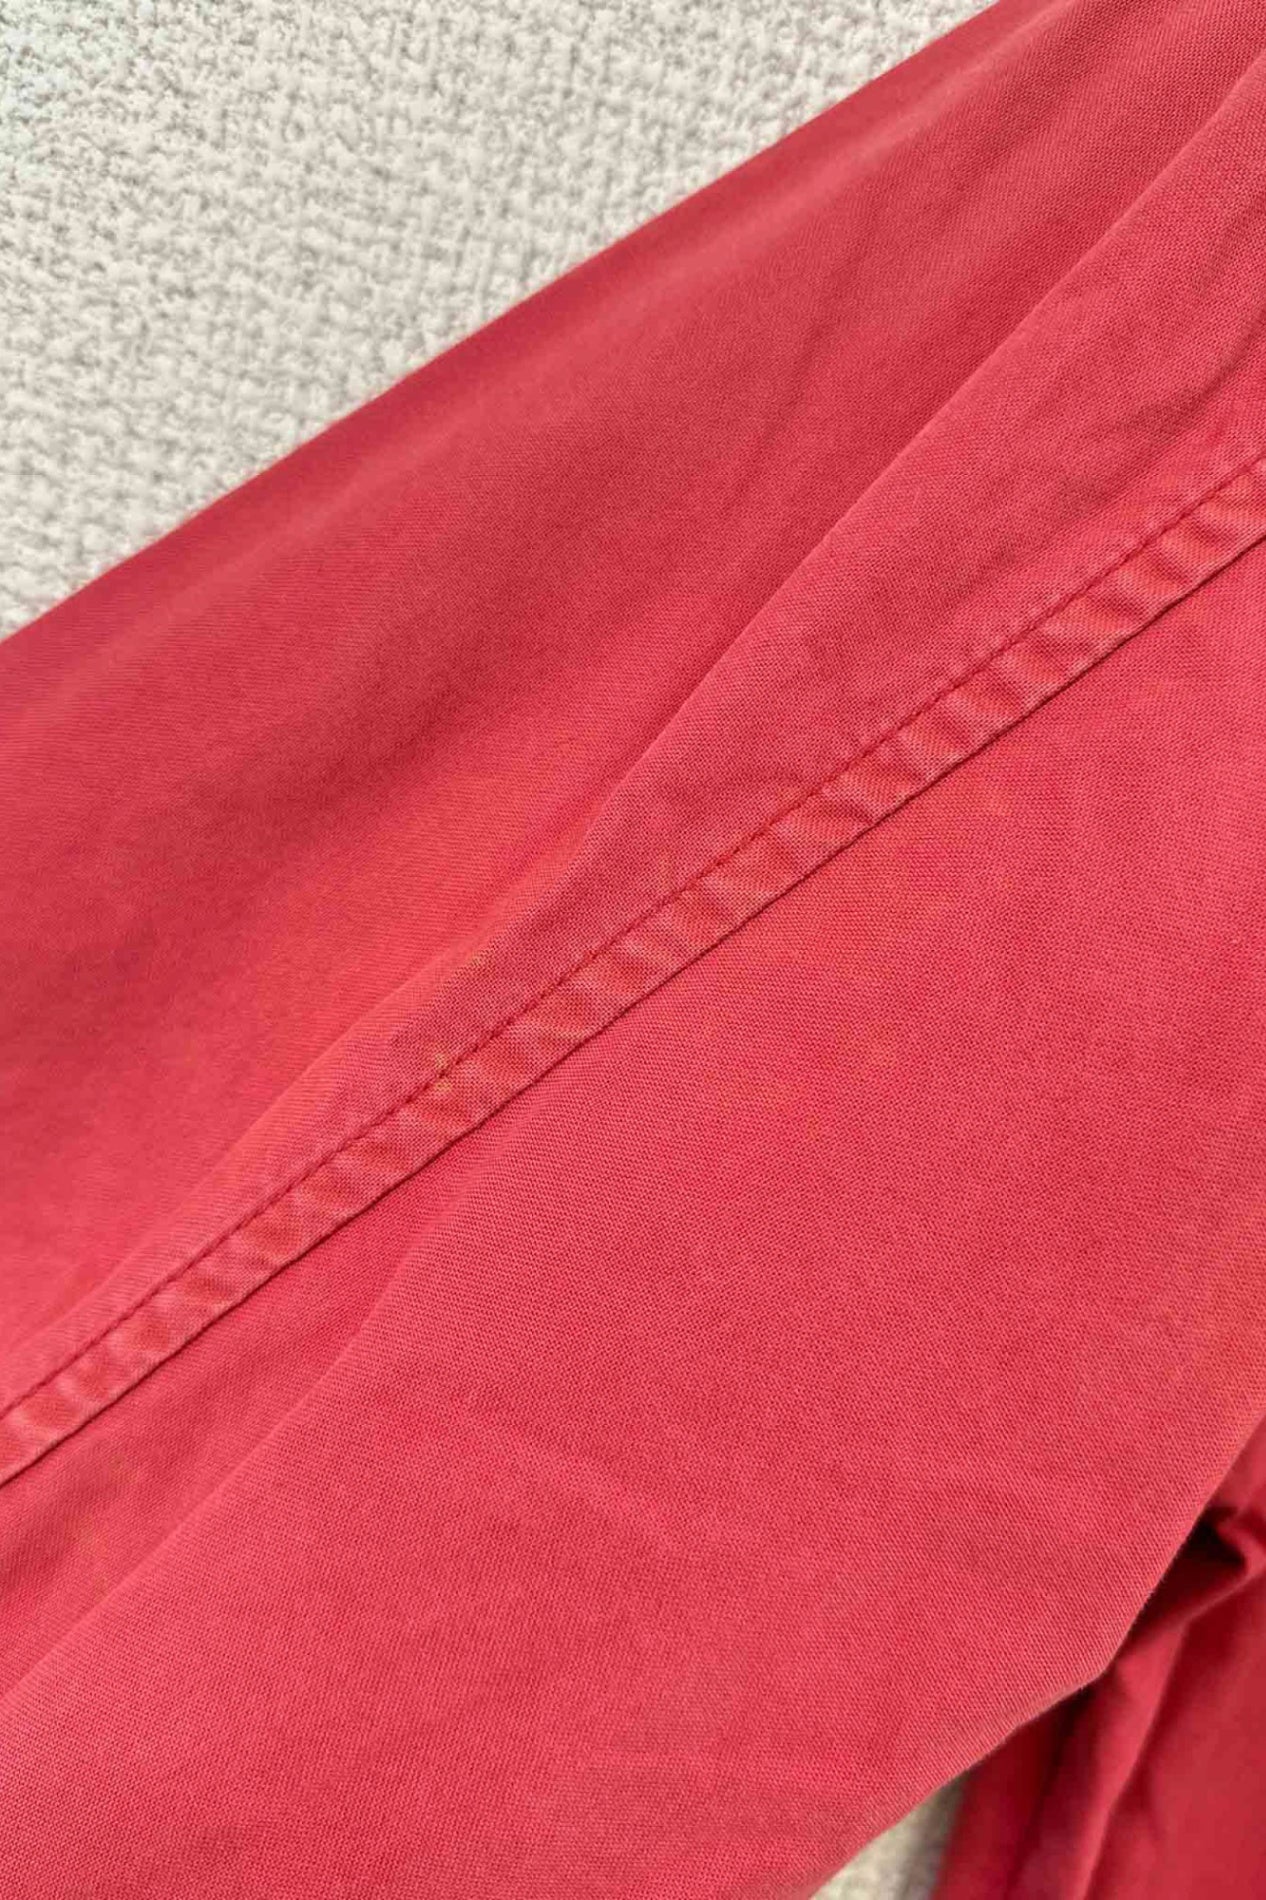 90's Polo by Ralph Lauren red cotton jacket